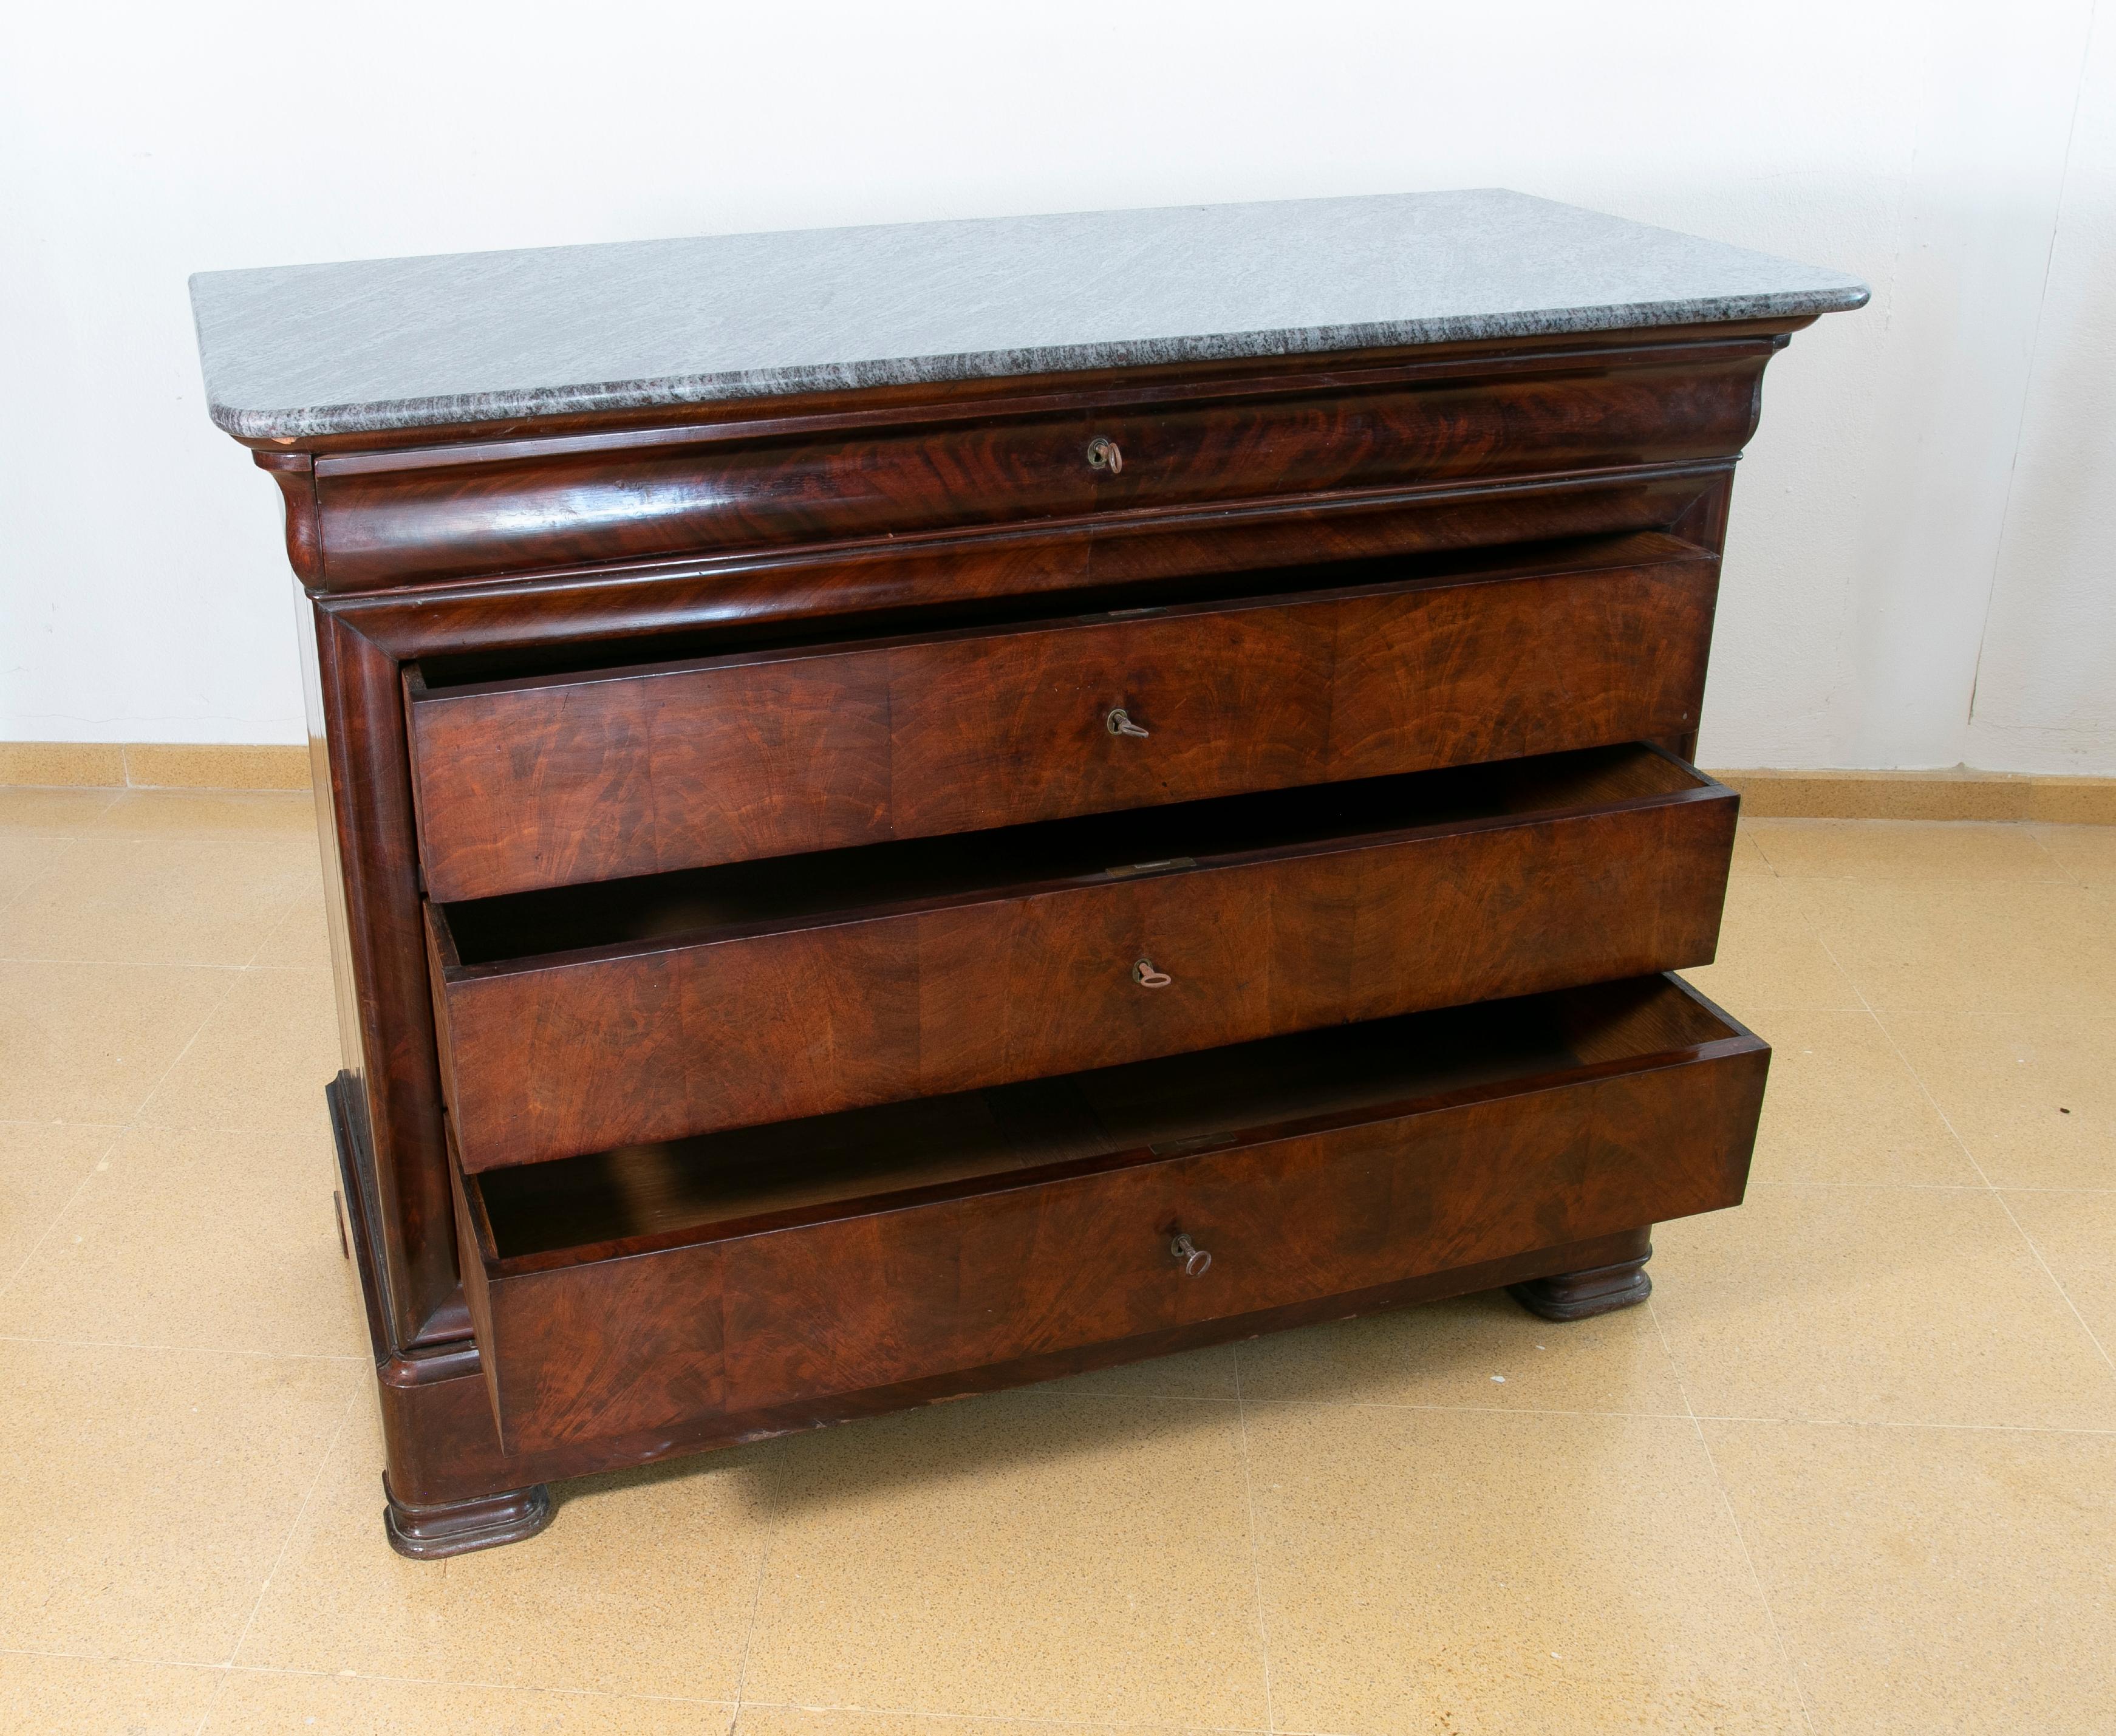 English mahogany chest of drawers with four drawers and marble top.